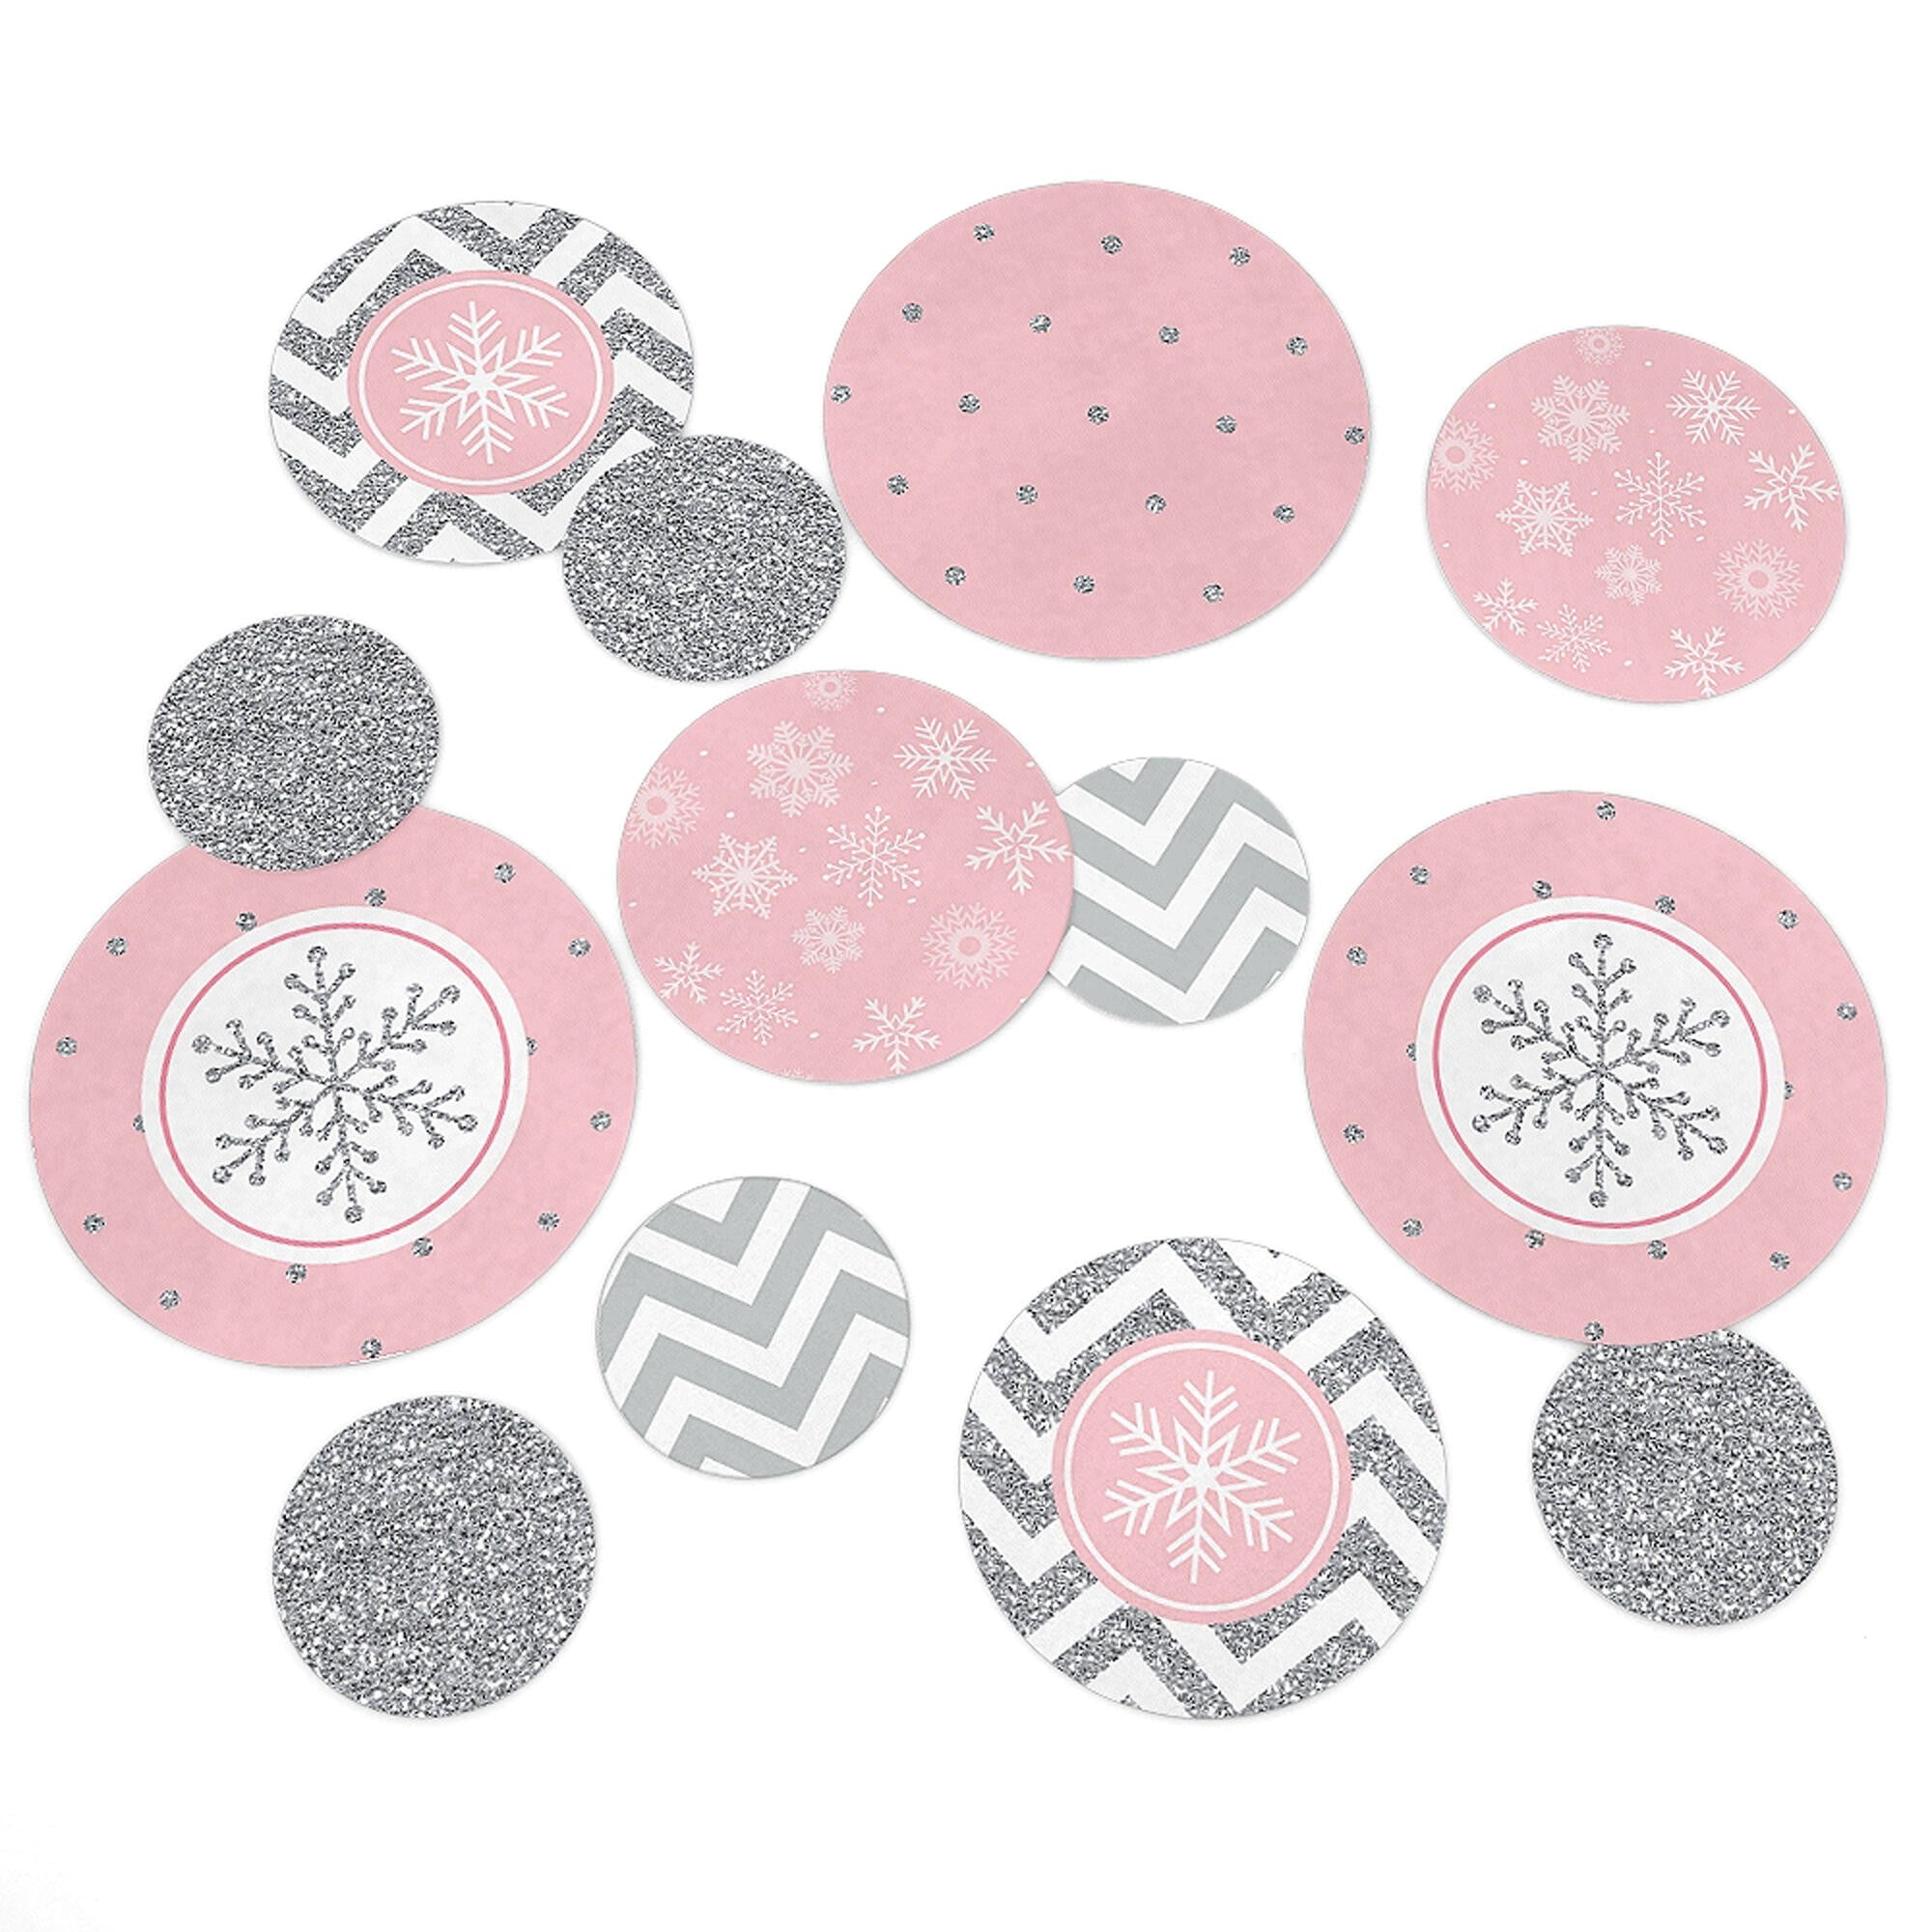 20 FROZEN GLITTER blue gold pink card party snowflakes confetti table decoration 